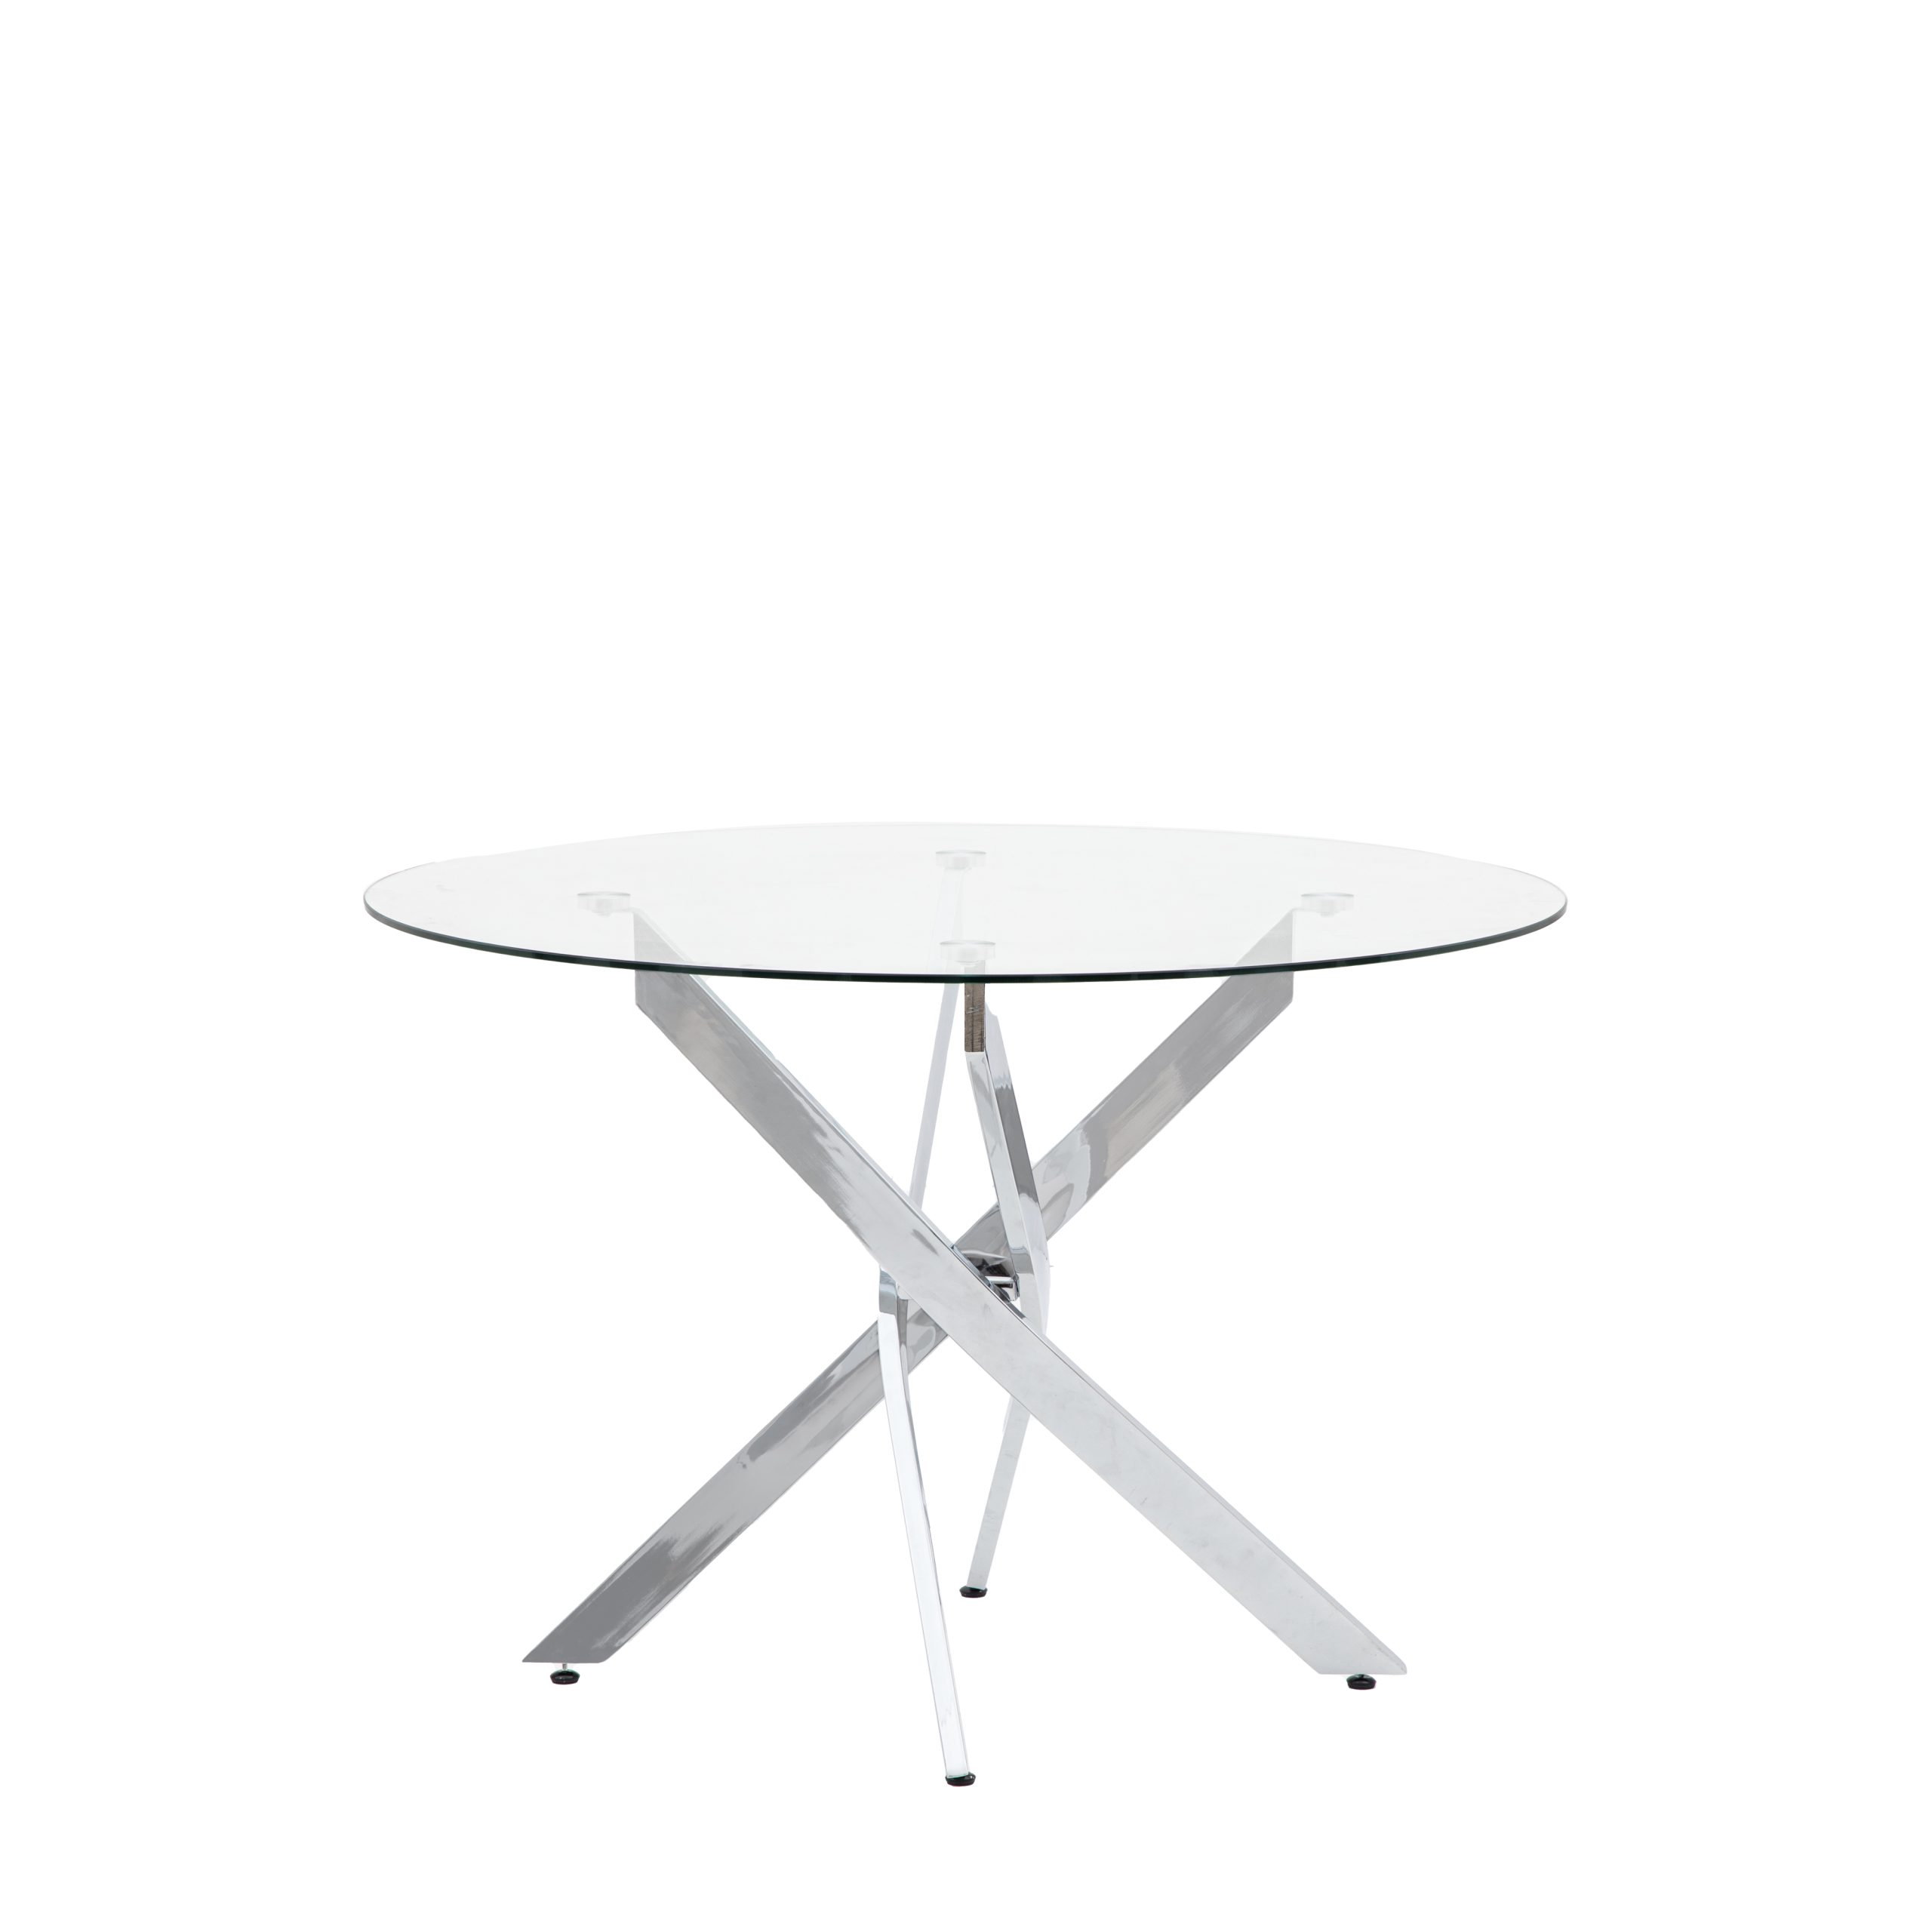 Gallery Direct Ramsey Dining Table | Shackletons